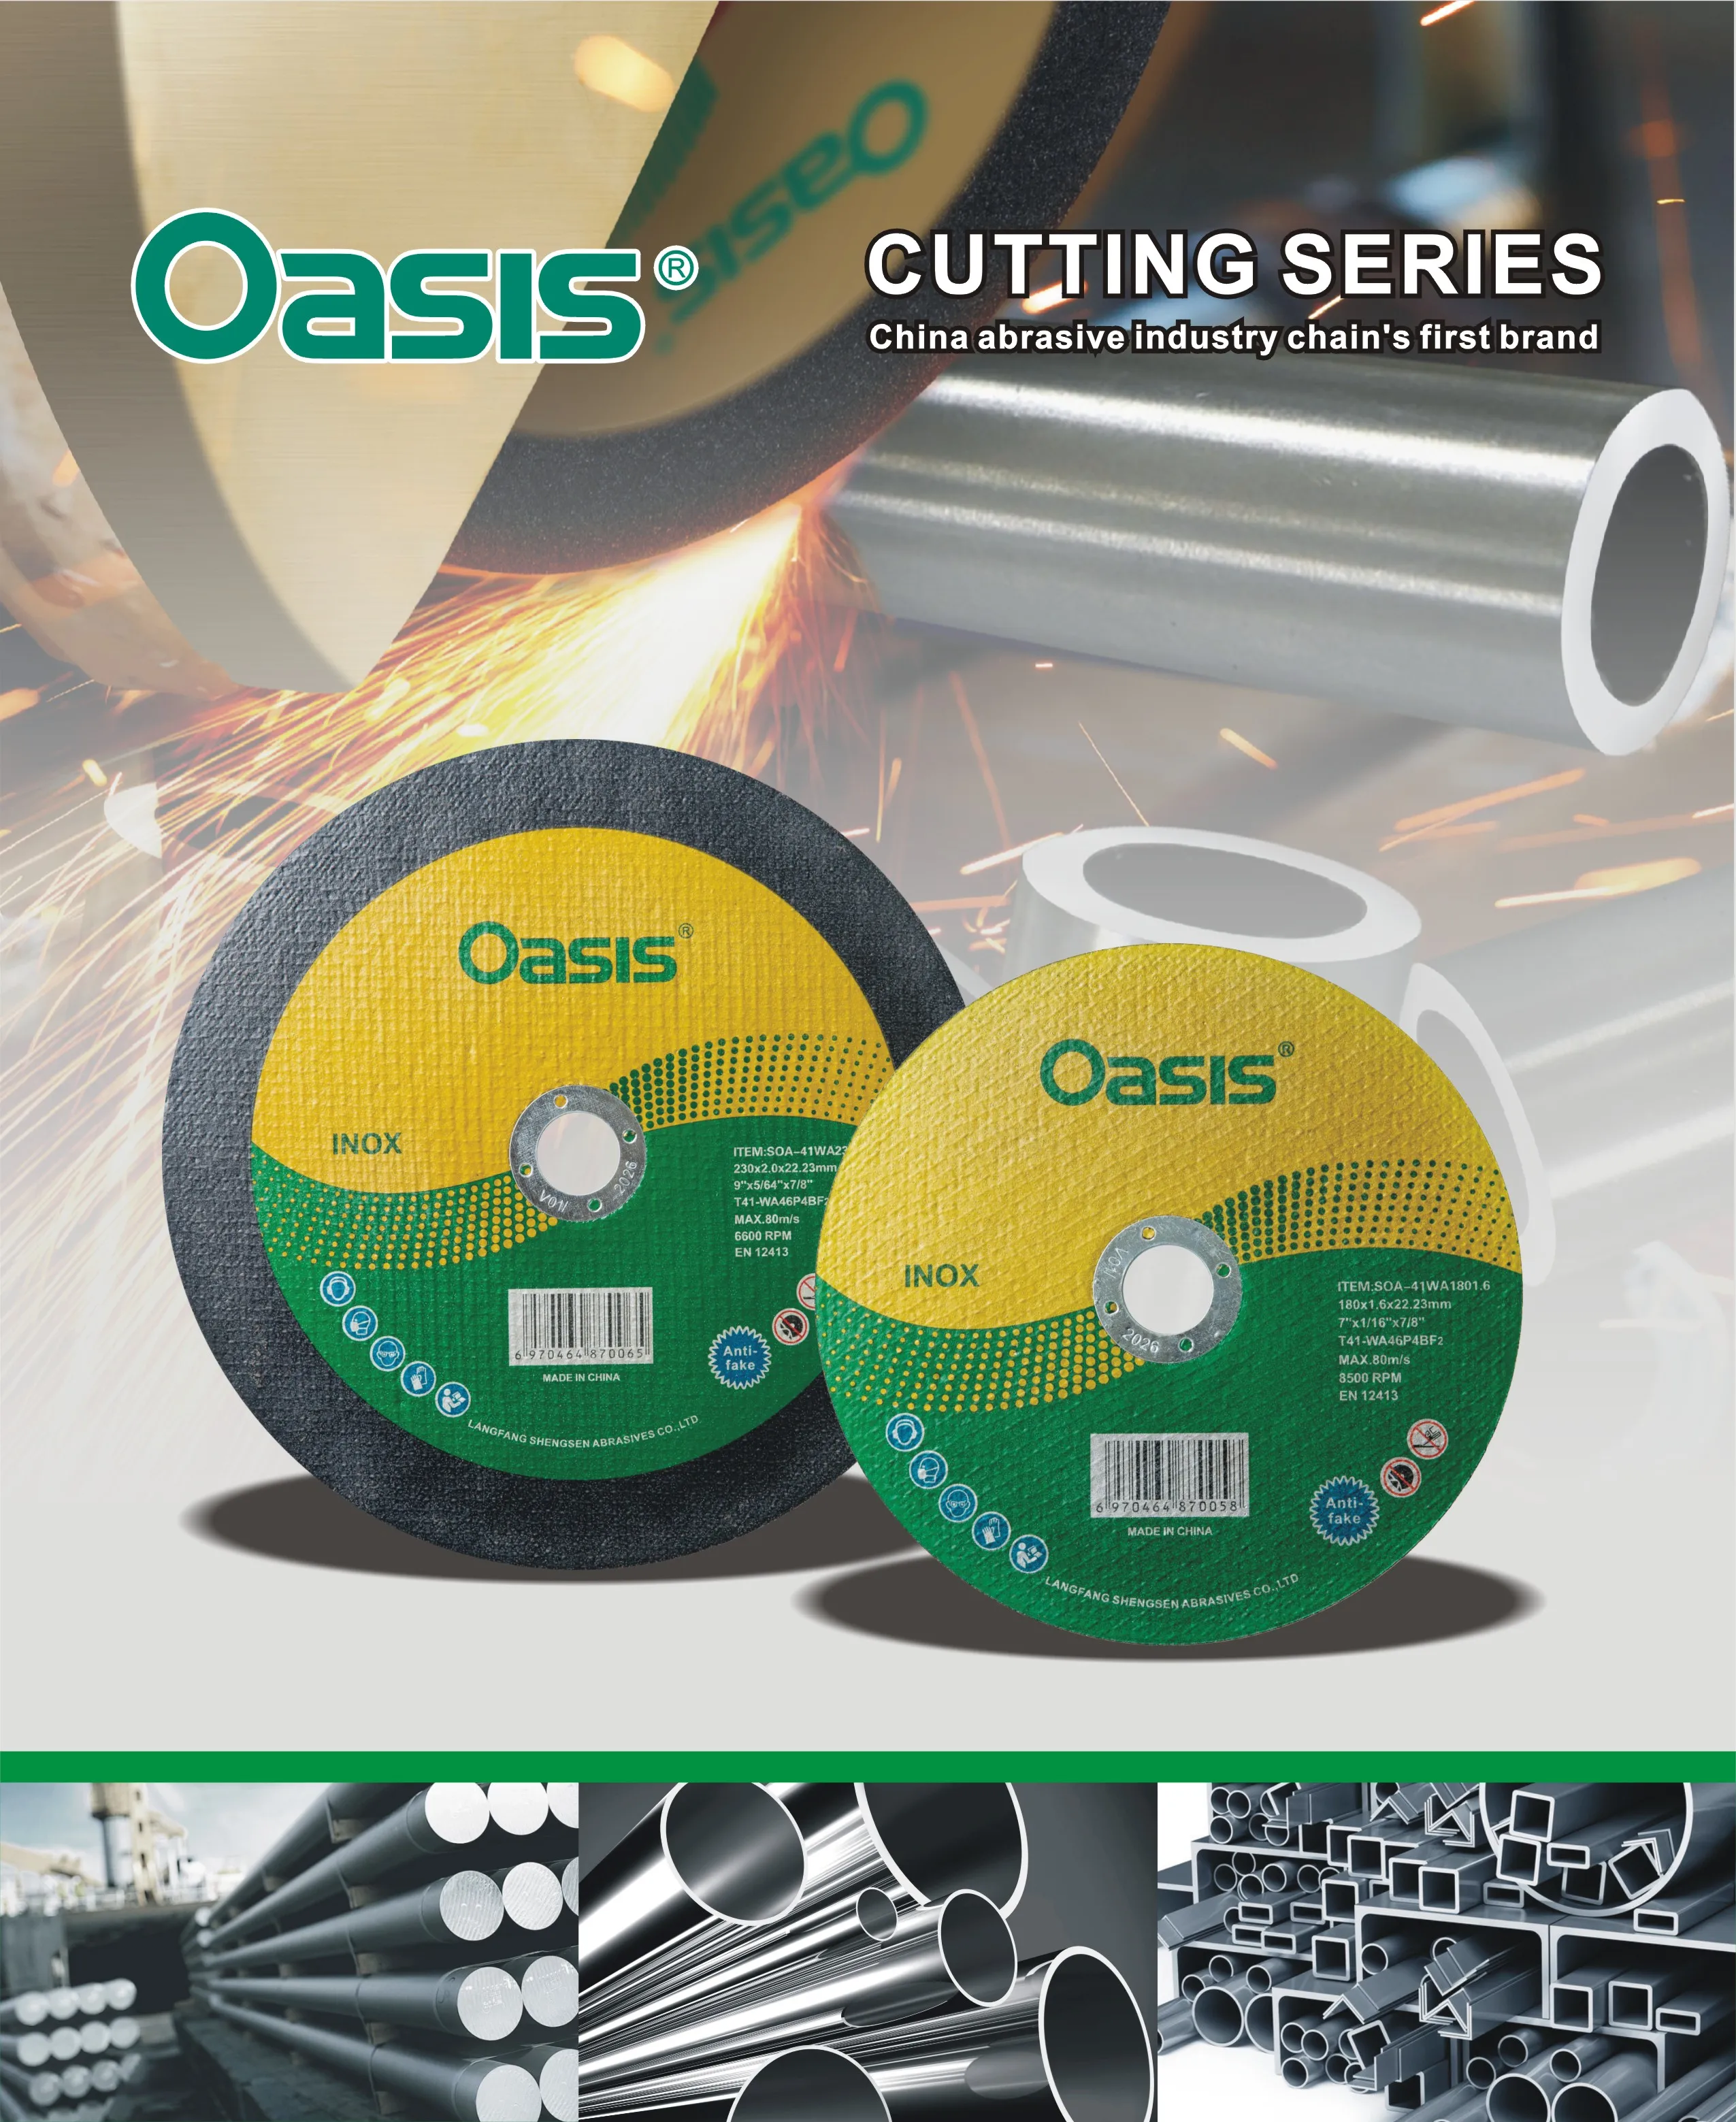 OASIS and SUNRISE BRAND WHOLESALE - Omangs cutting disc